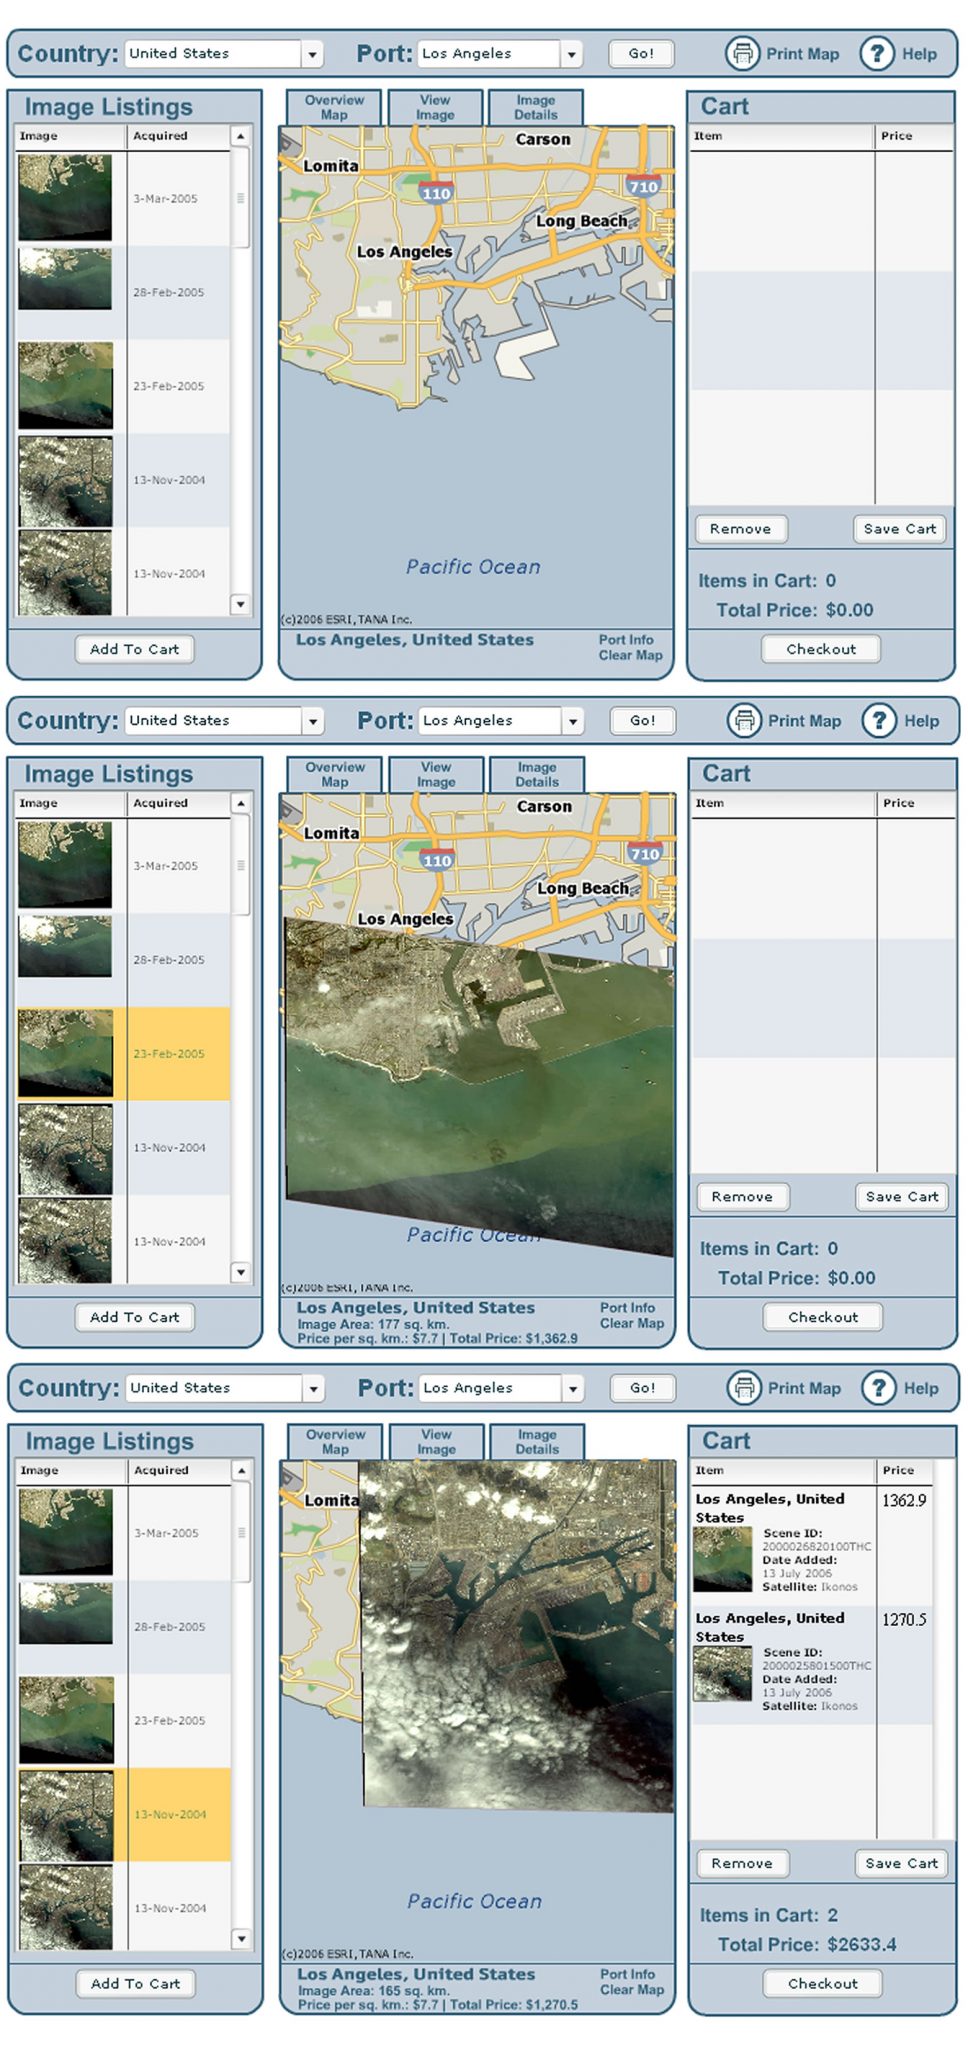 Flash-based application that searched for imagery related to a sea port and displayed imagery based on criteria.